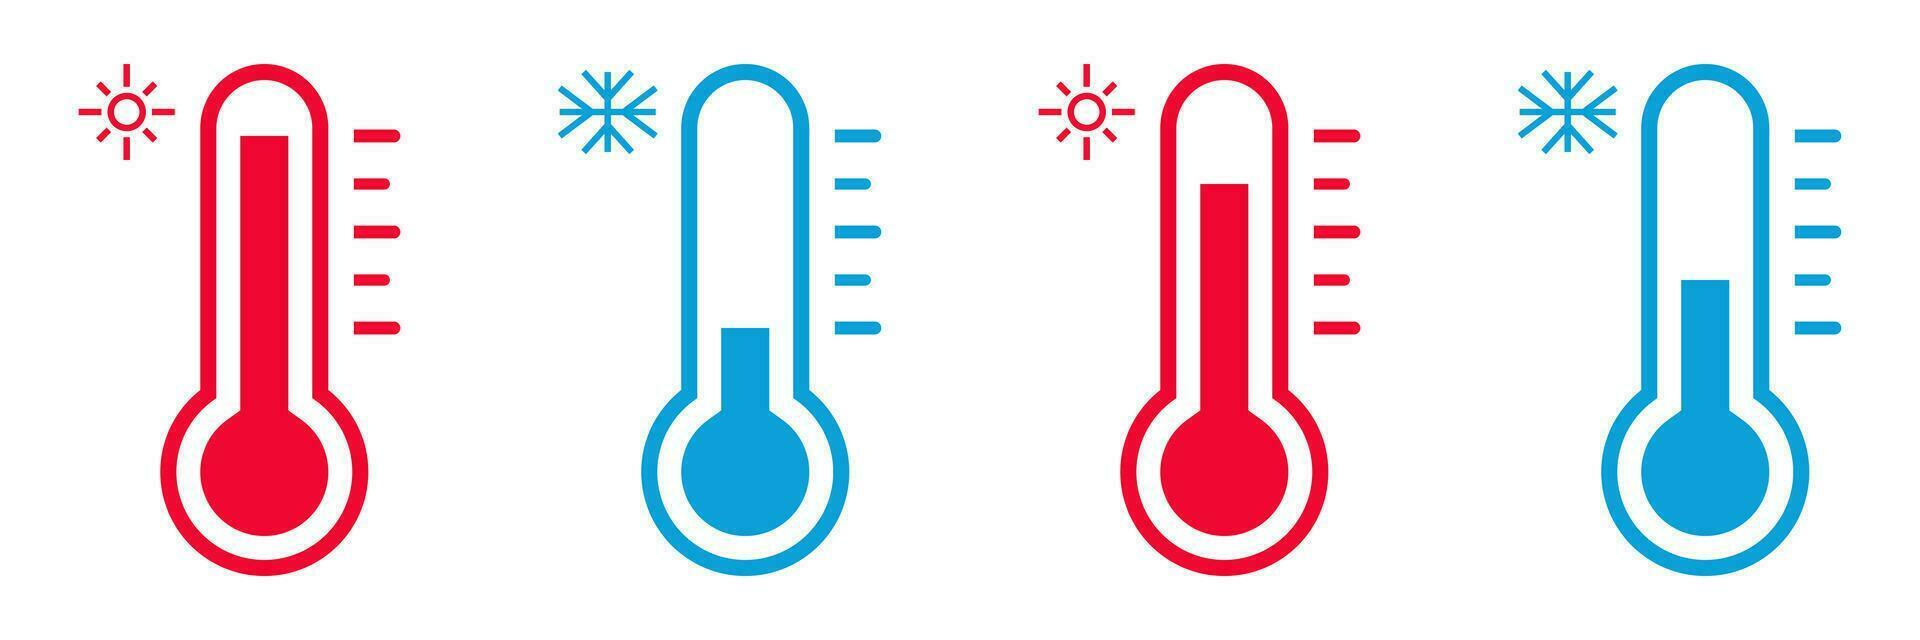 thermometer icon set in red and blue colors. symbols for measuring hot and cold body temperature. vector isolated on white background, modern and simple flat design.